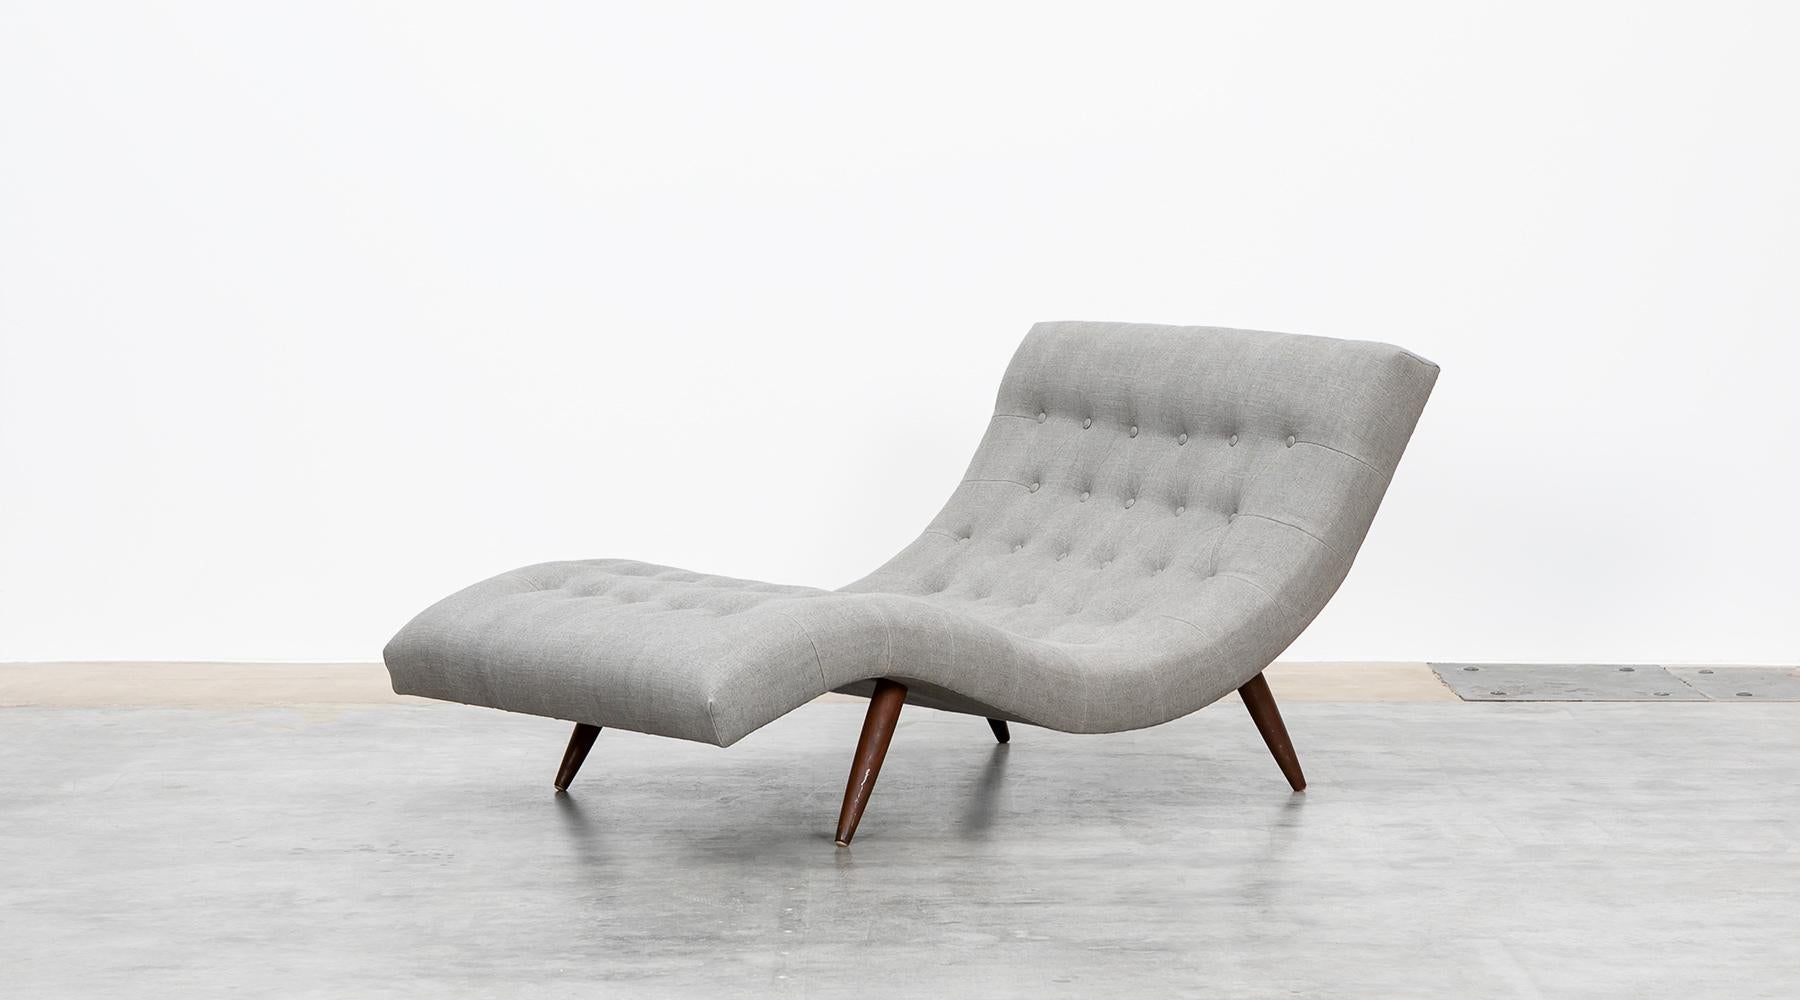 New upholstery in grey high-quality fabric, walnut base, daybed by Adrian Pearsall, USA, 1970.

This organically shaped daybed stands on solid walnut tapered legs. The chaise loungeis newly upholstered with a high-quality warm grey fabric. The lying